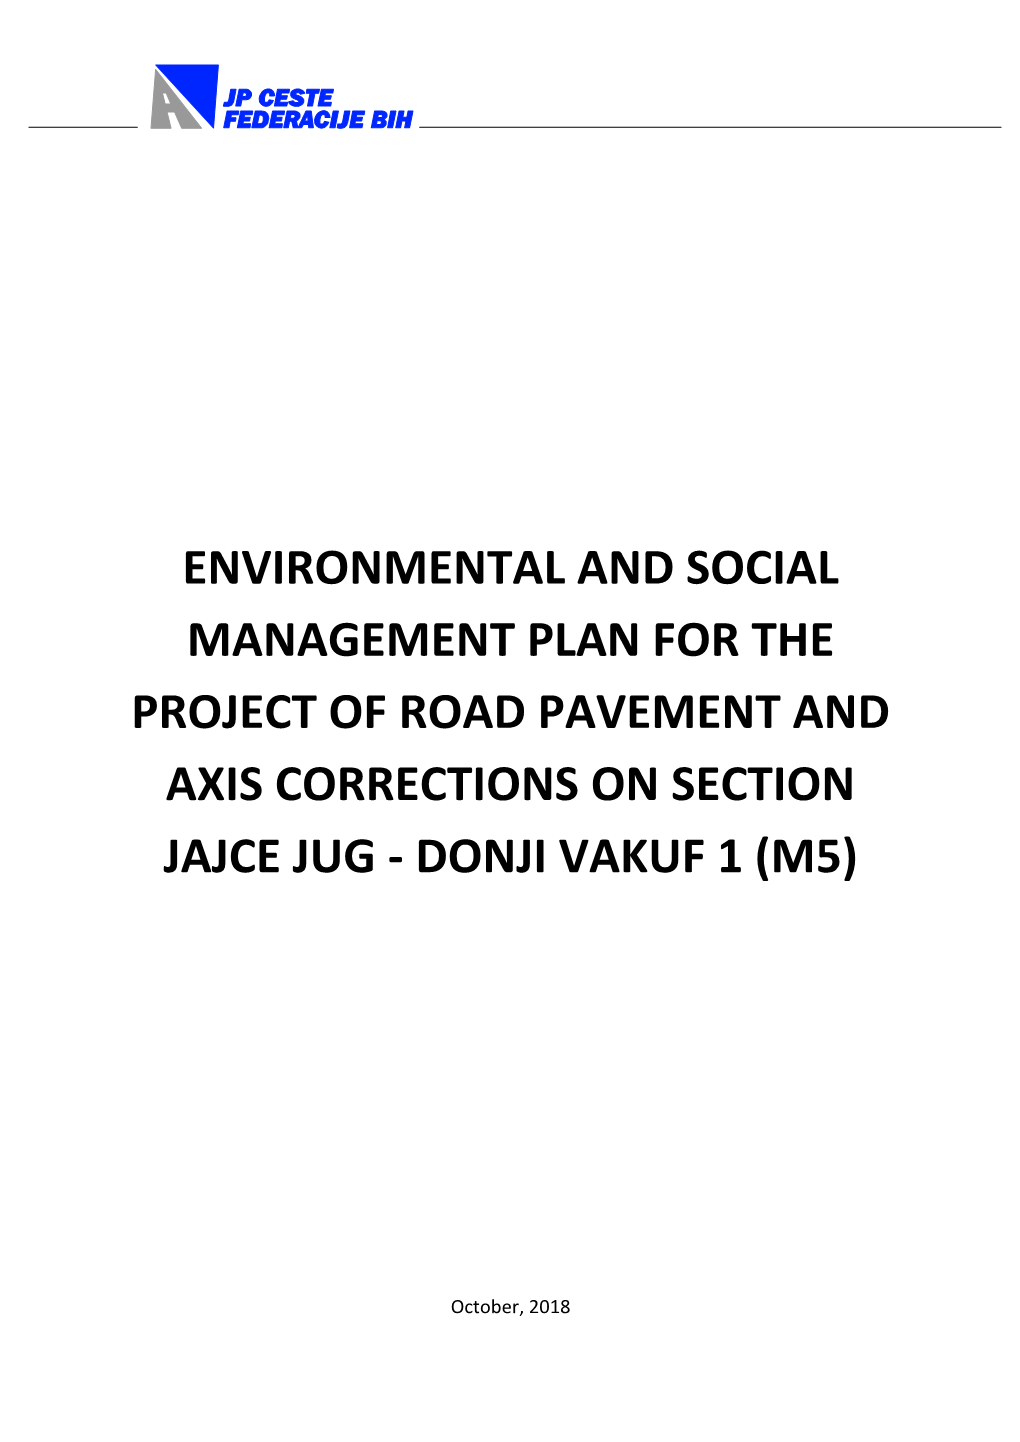 Environmental and Social Management Plan for the Project of Road Pavement and Axis Corrections on Section Jajce Jug - Donji Vakuf 1 (M5)